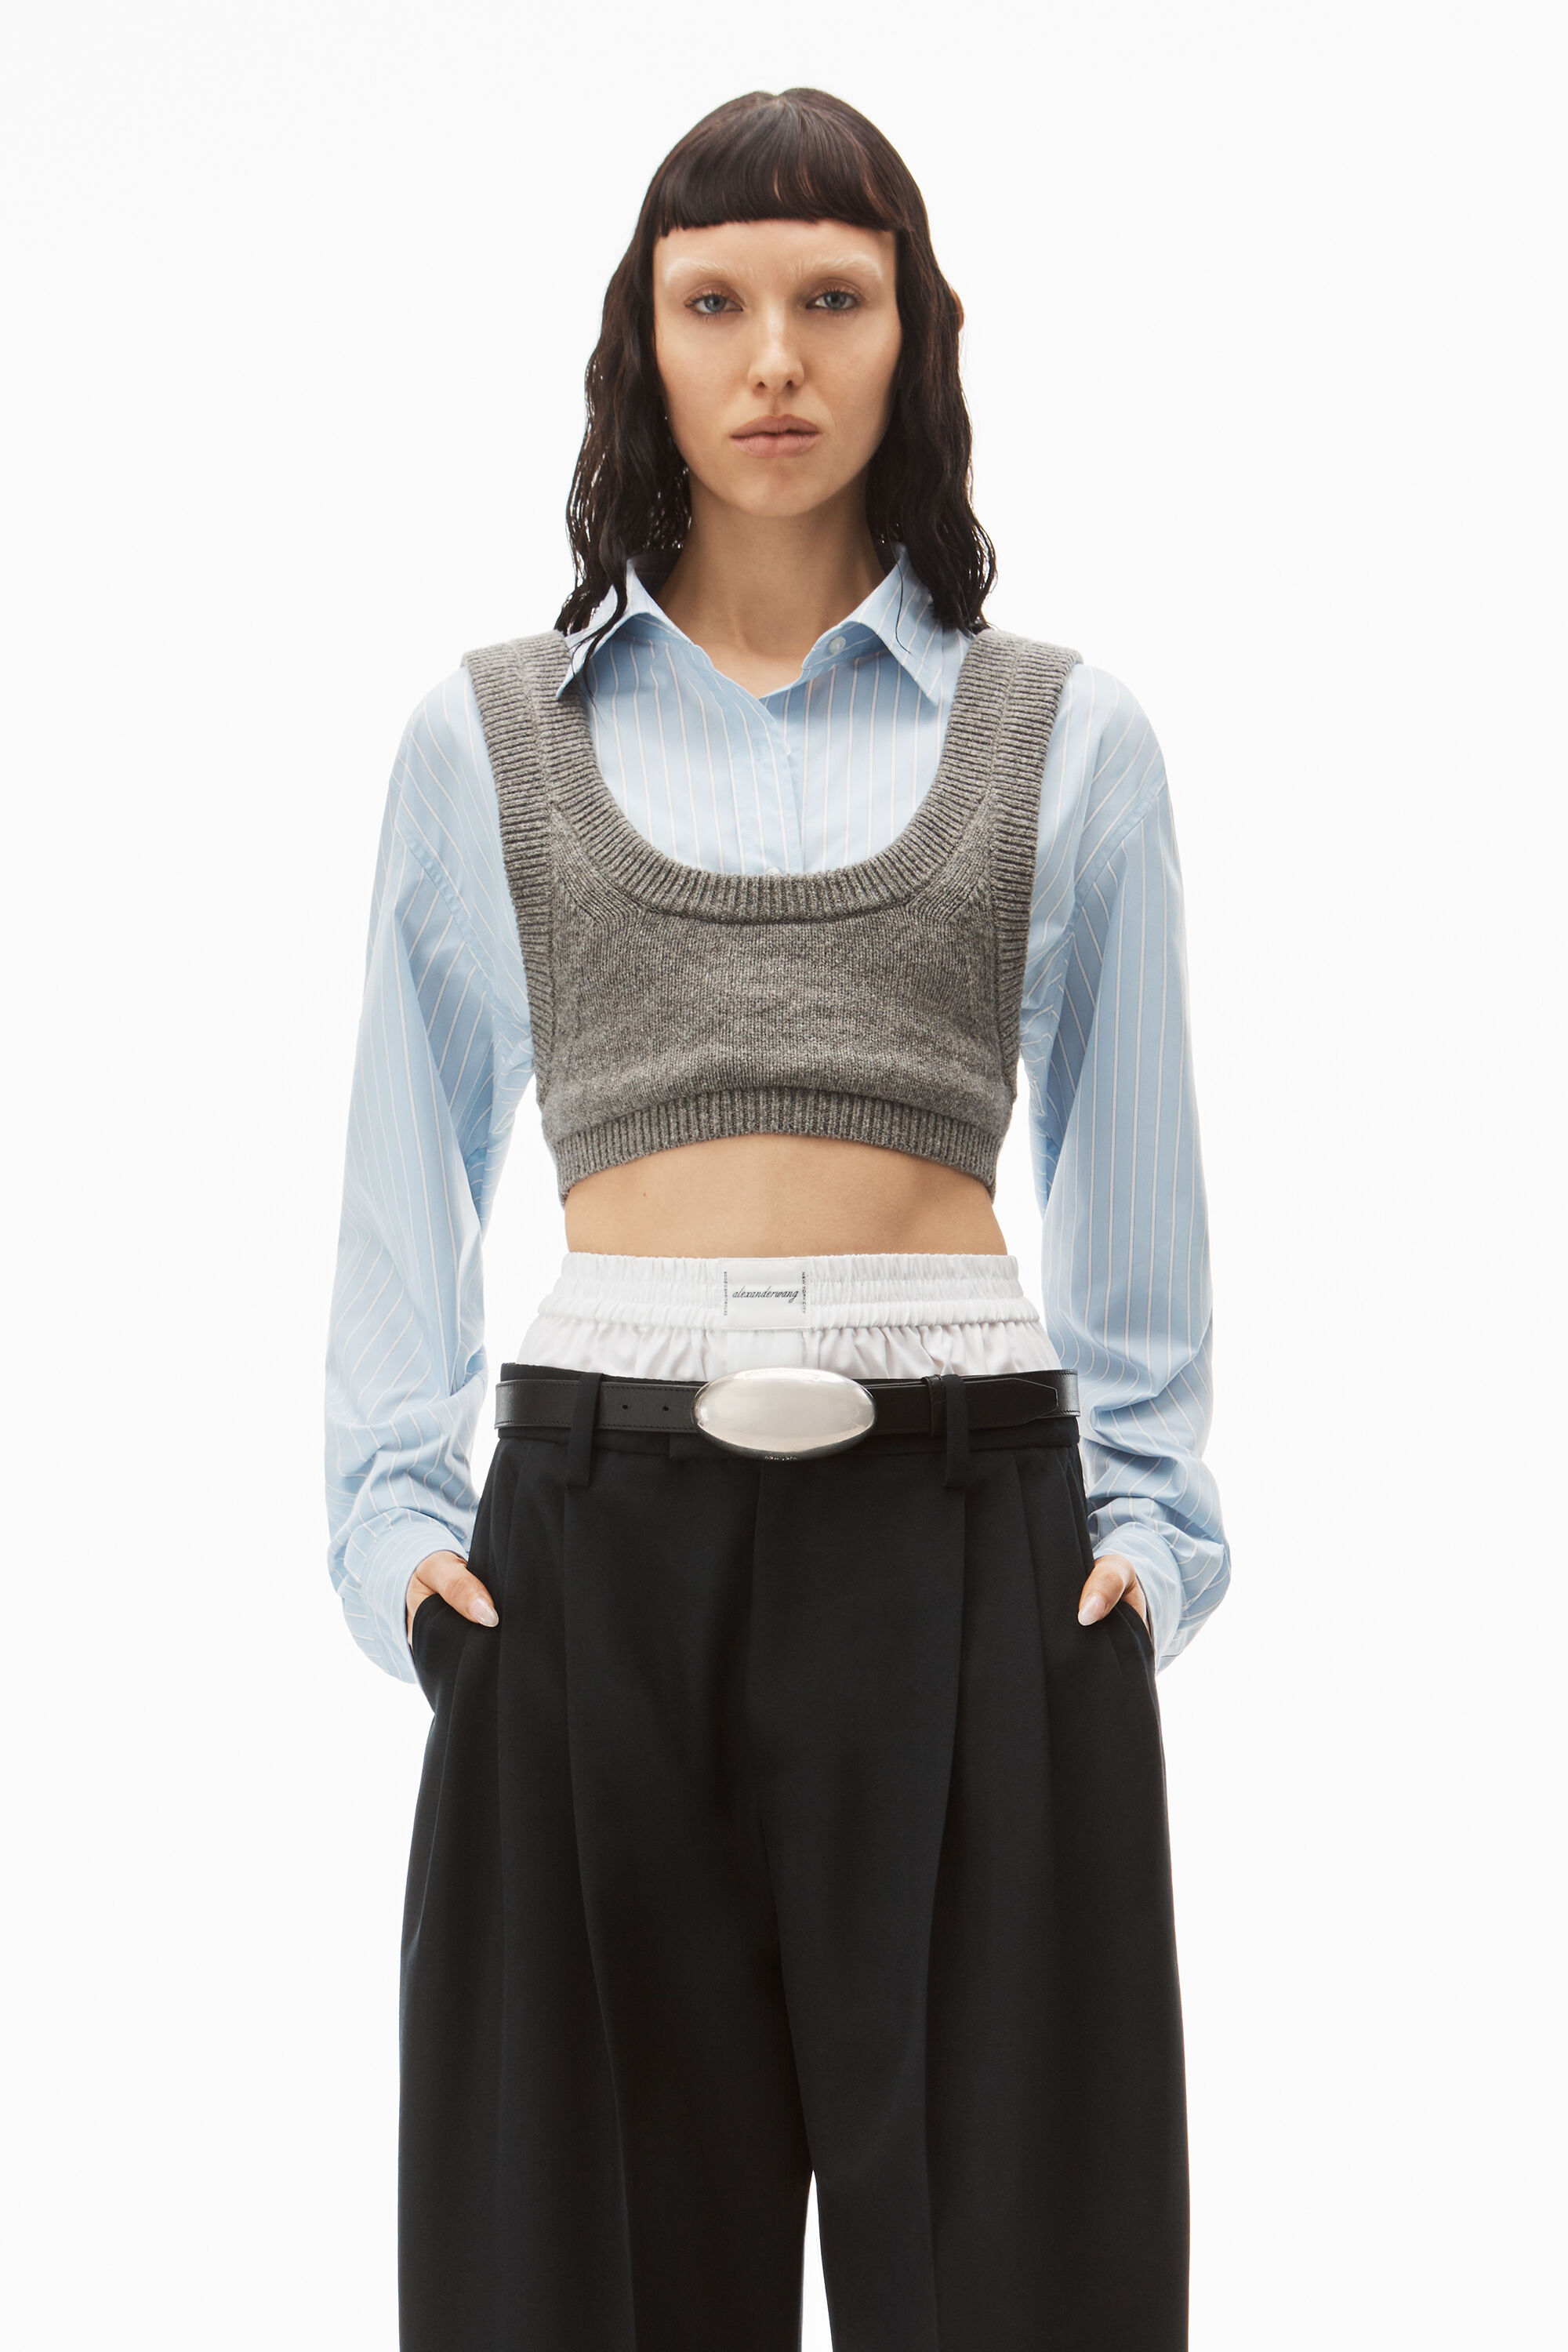 alexanderwang LAYERED KNIT CAMISOLE IN BOILED WOOL